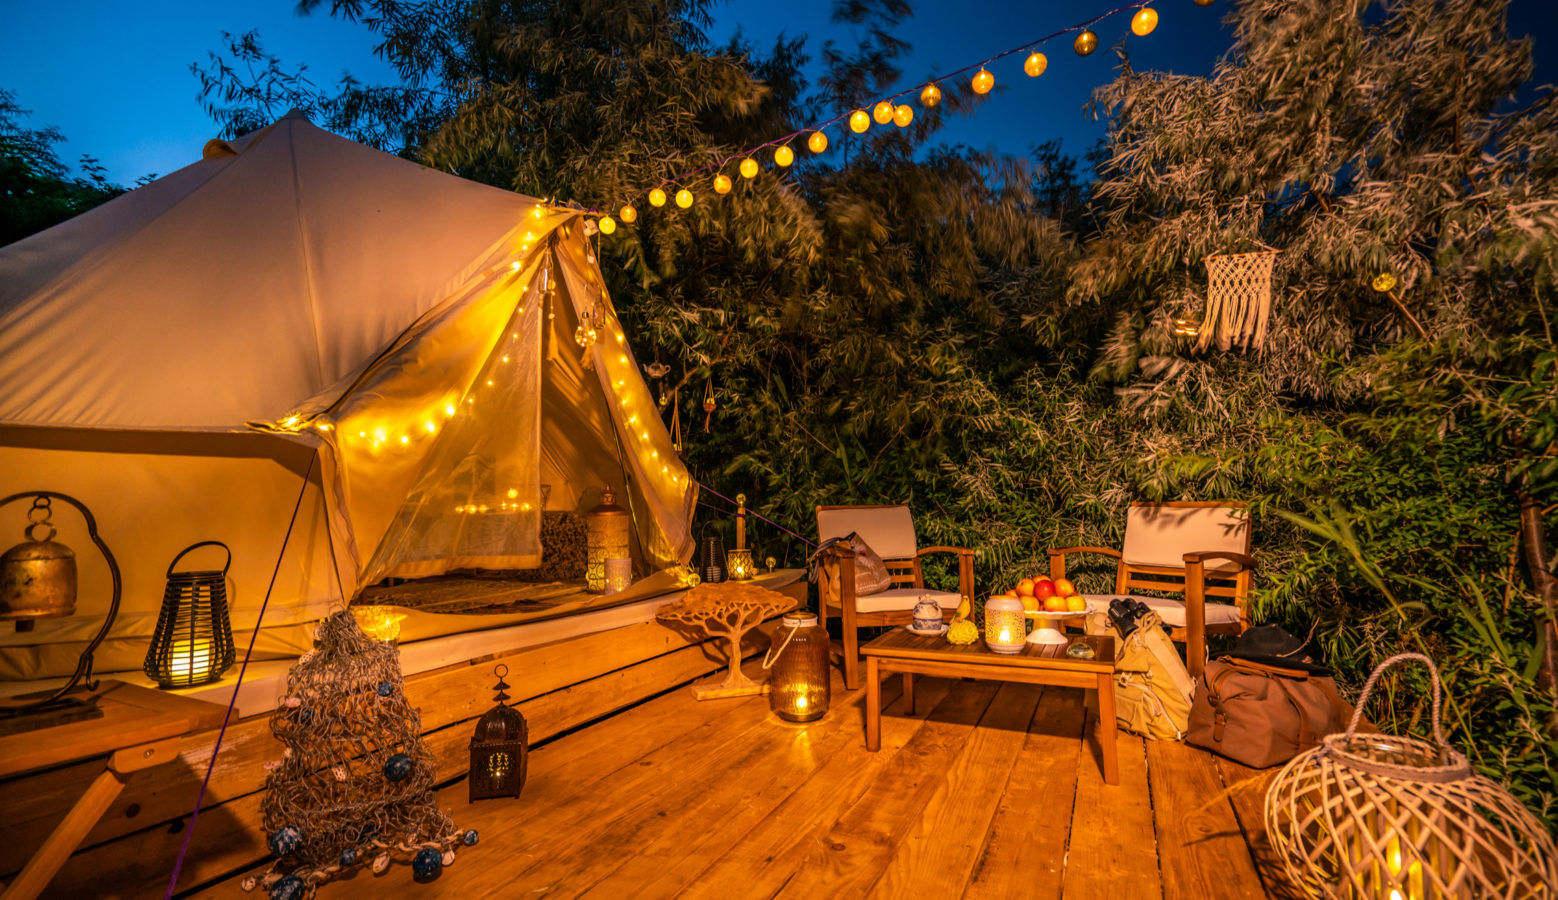 Check out these 8 glamping destinations near Pune if you love the great outdoors